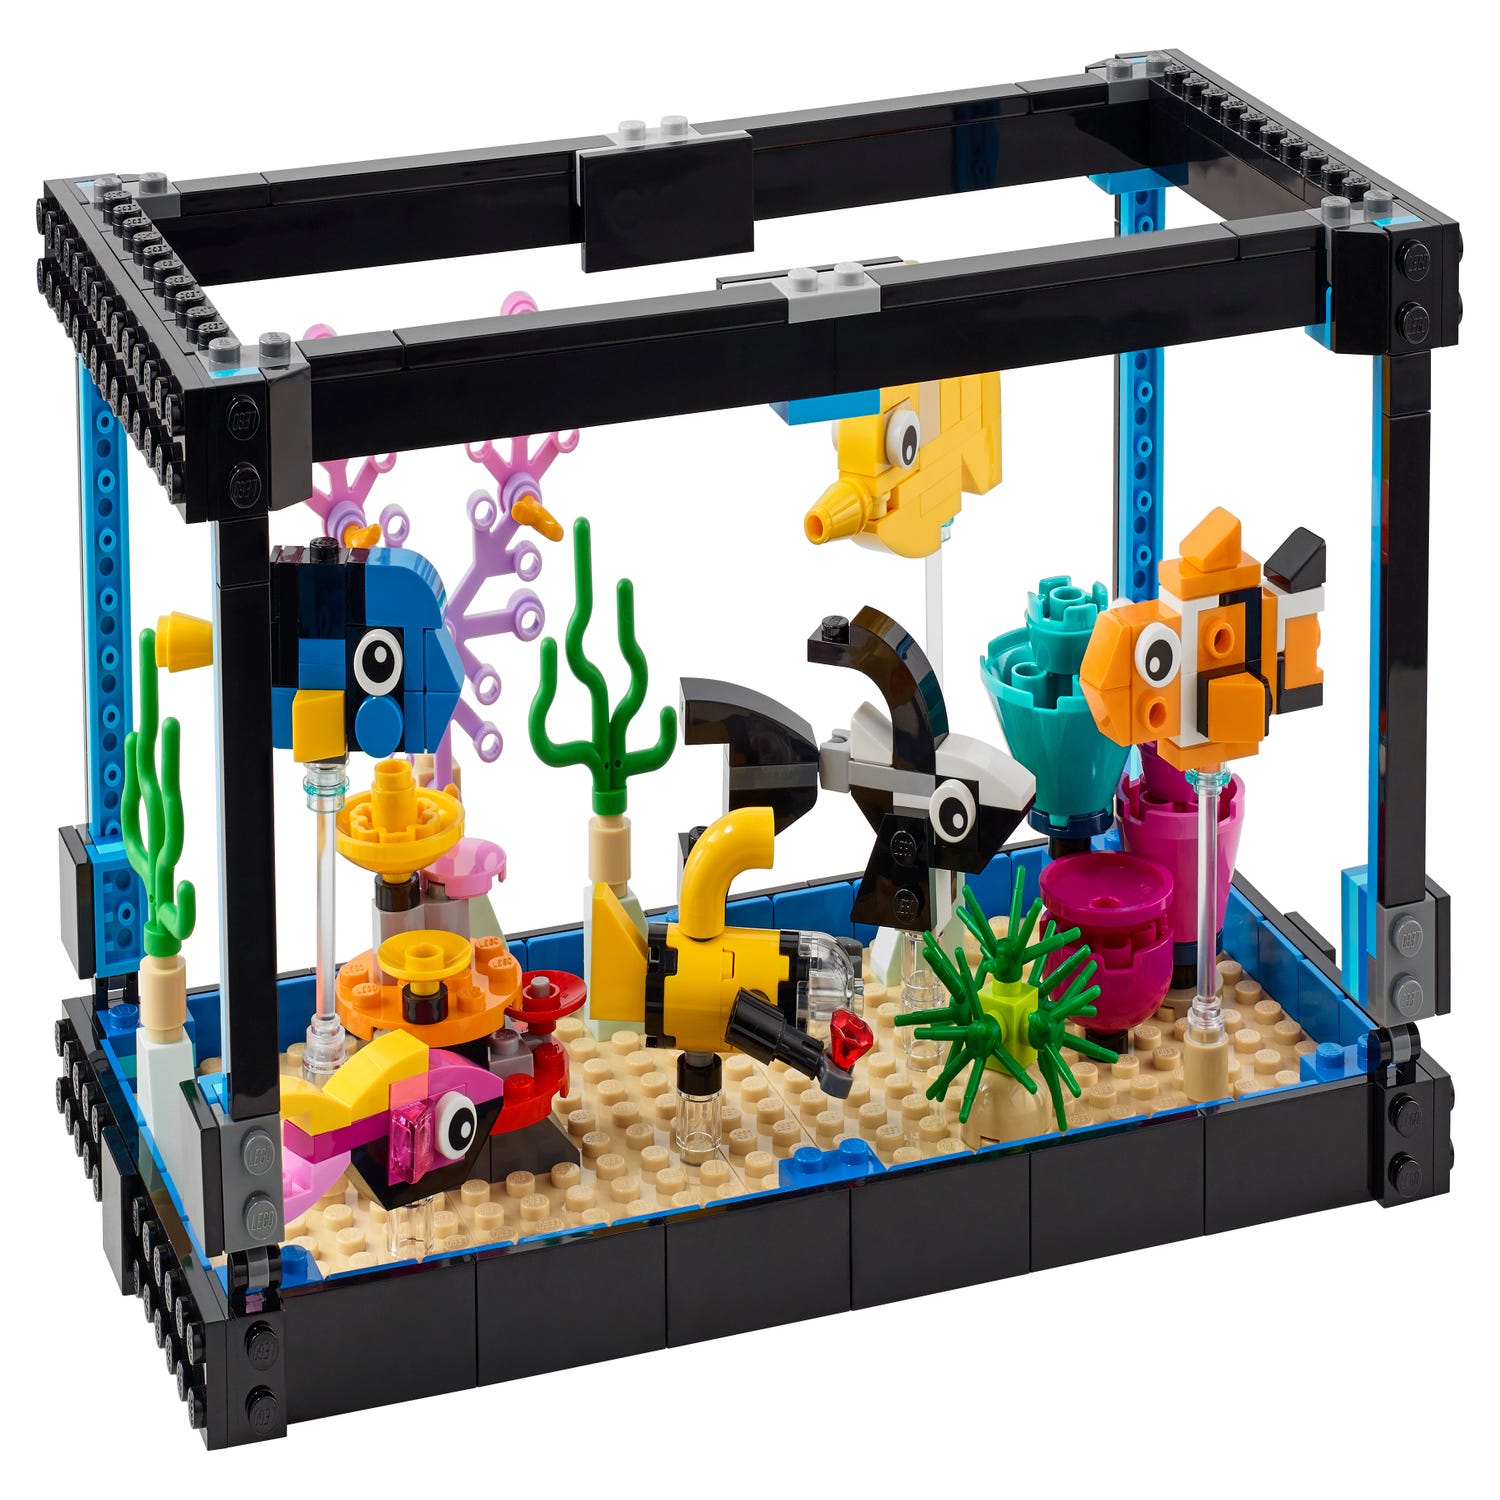 Lego Creator Fish Tank 31122 Exclusive 3-in-1 Building Set,8 years and up